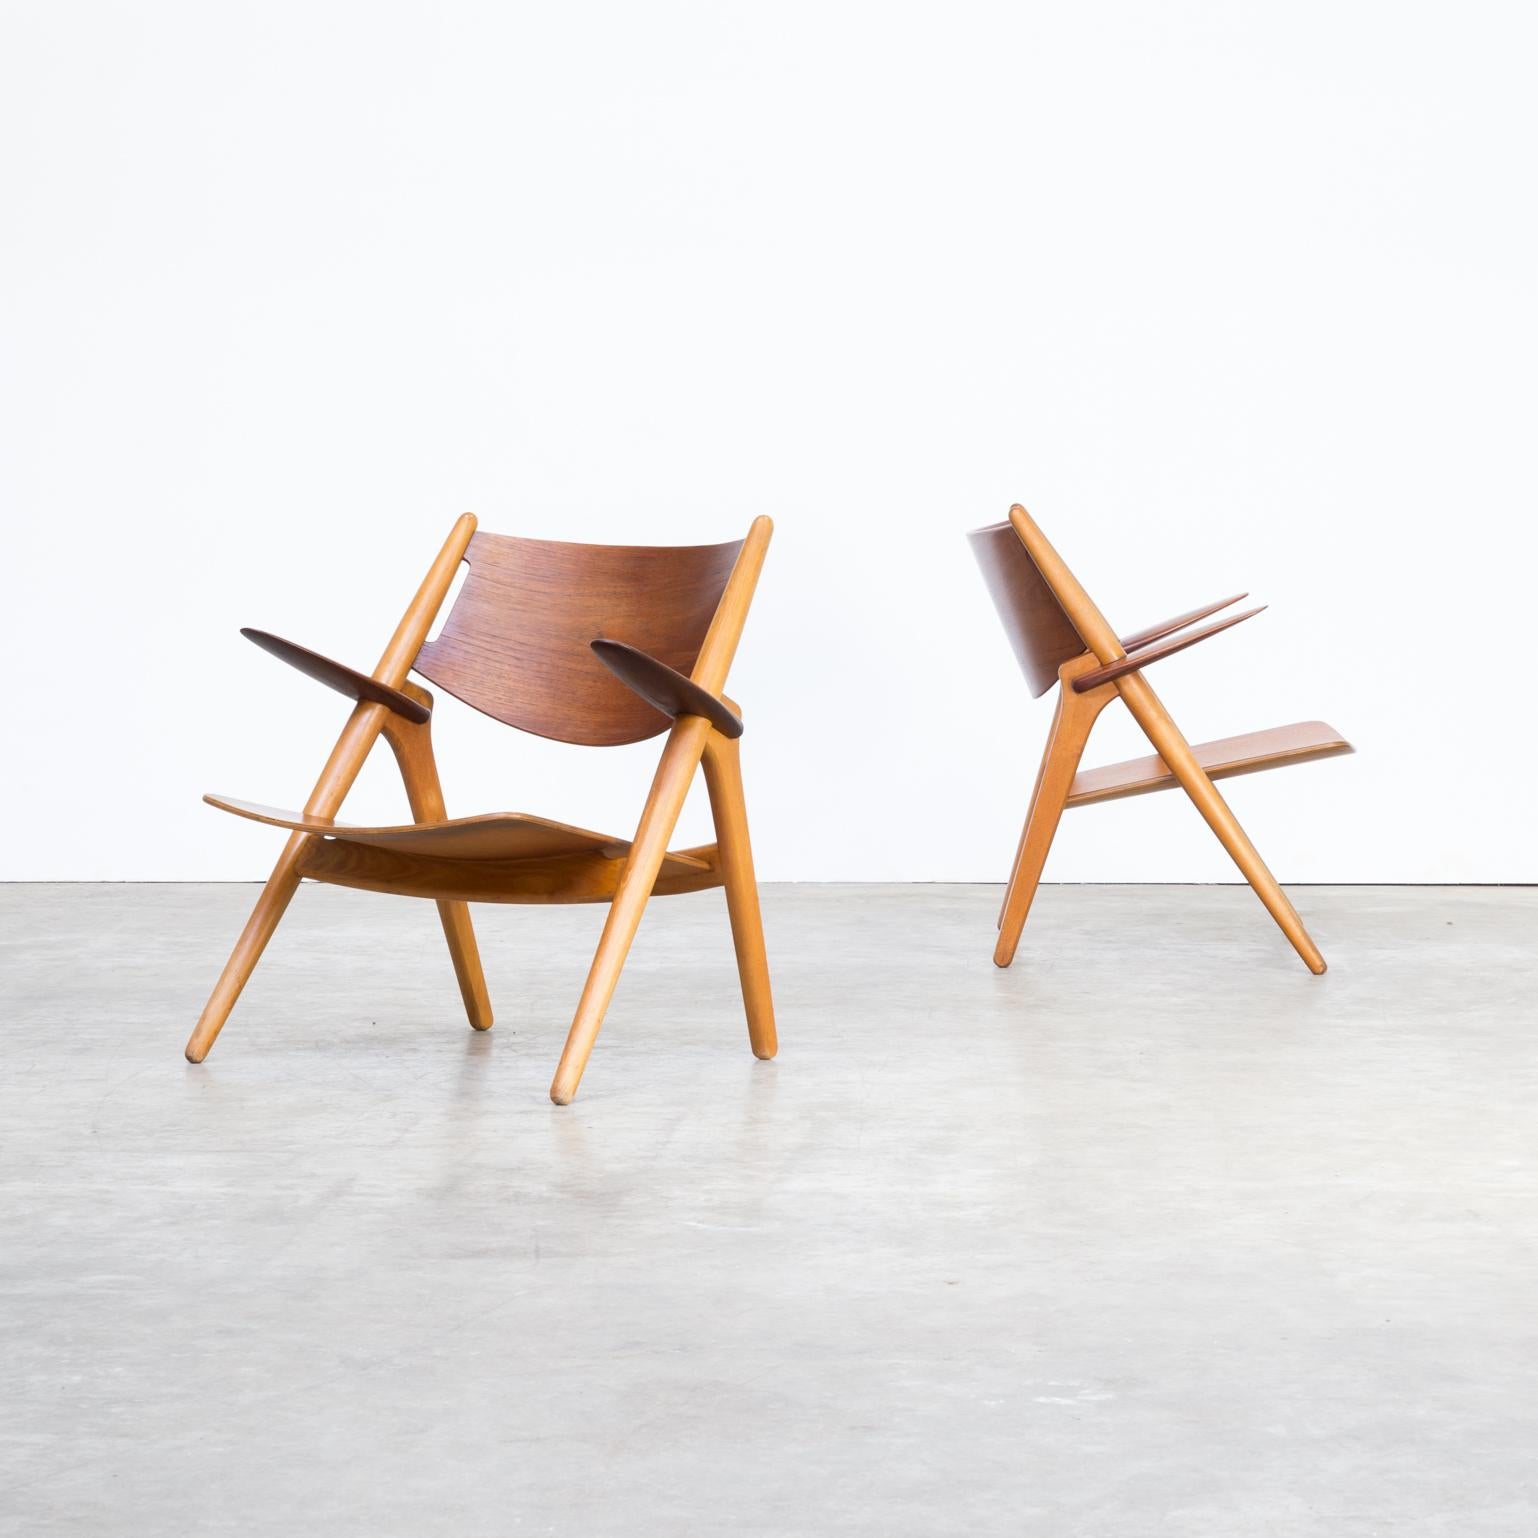 1950s Hans Wegner ‘CH28T’ fauteuil for Carl Hansen & Søn set of two. 1st Edition. Very rare and good condition consistent with age and use.